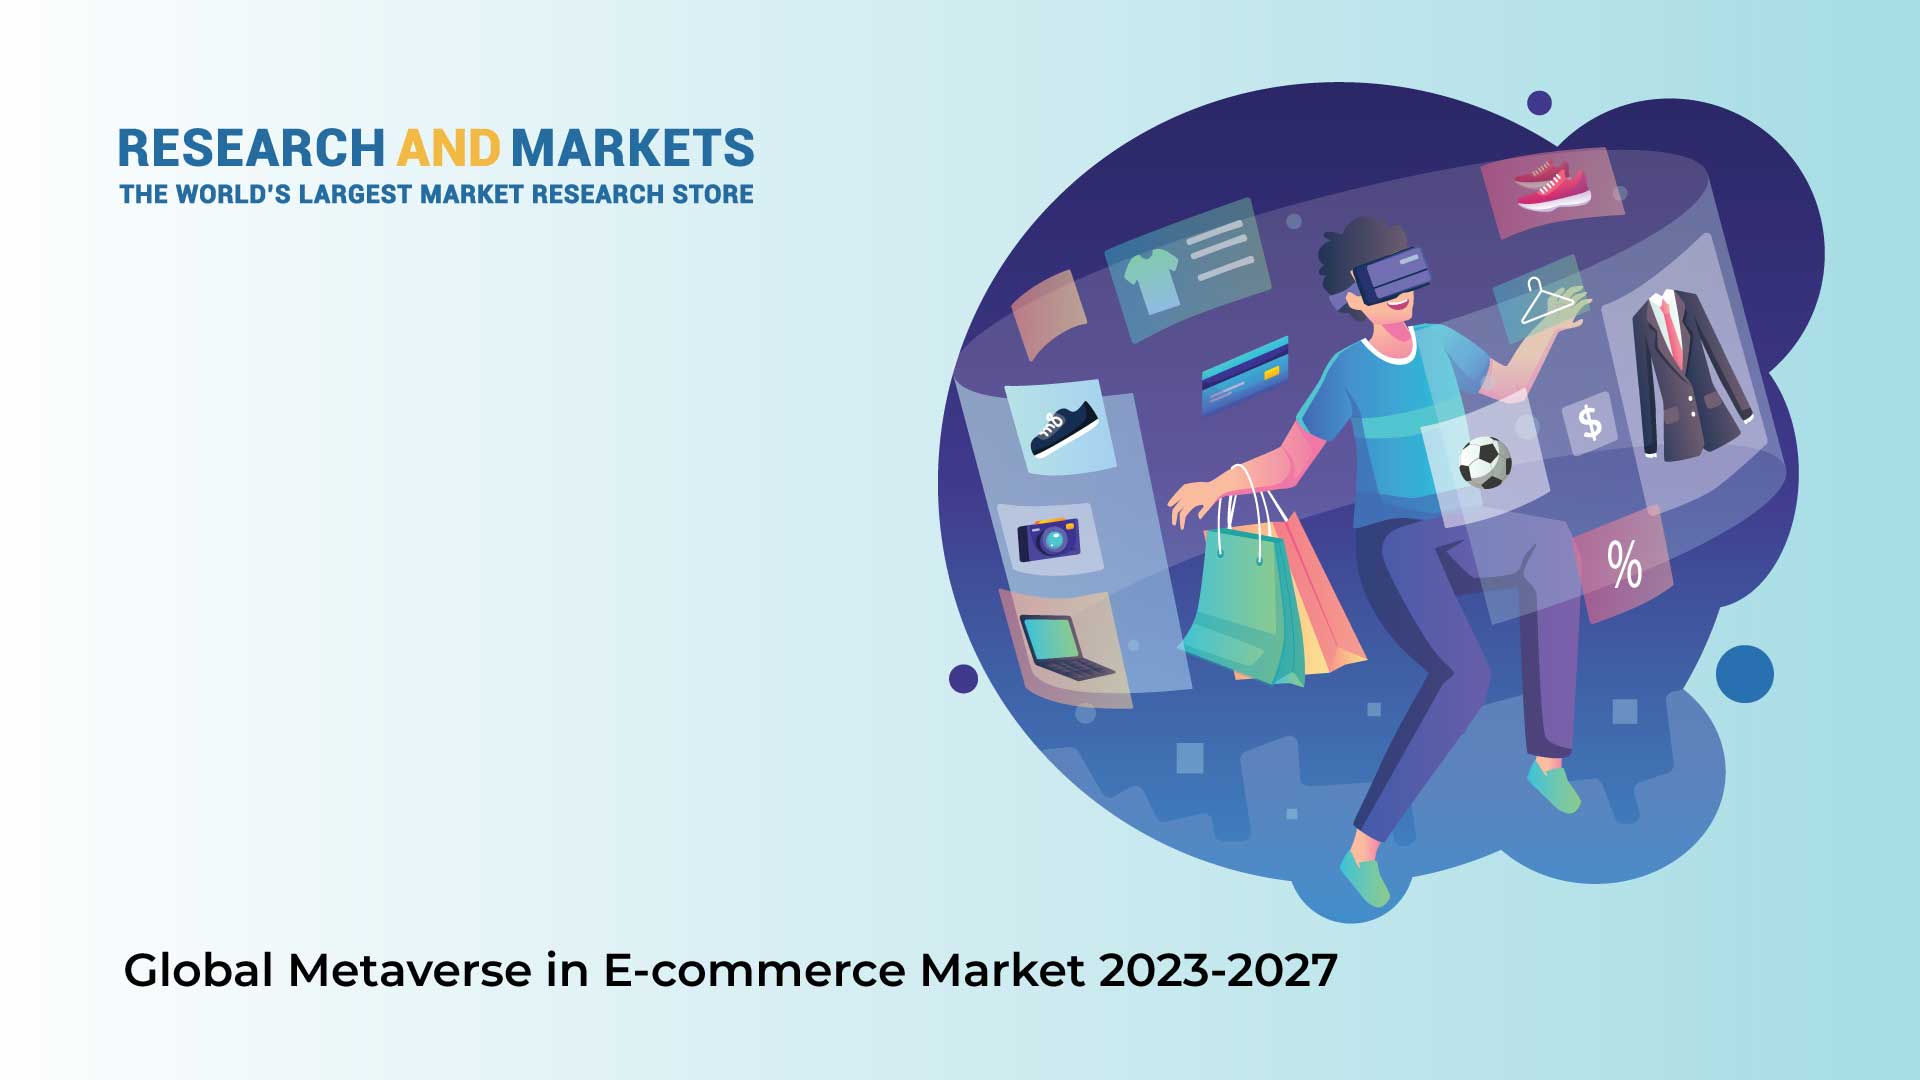 Global Metaverse in E-commerce Markets Report 2023-2027: Multi-Billion Market to Grow at a Staggering CAGR of 39.65 with Growing Marketing Initiatives Bolstering Growth